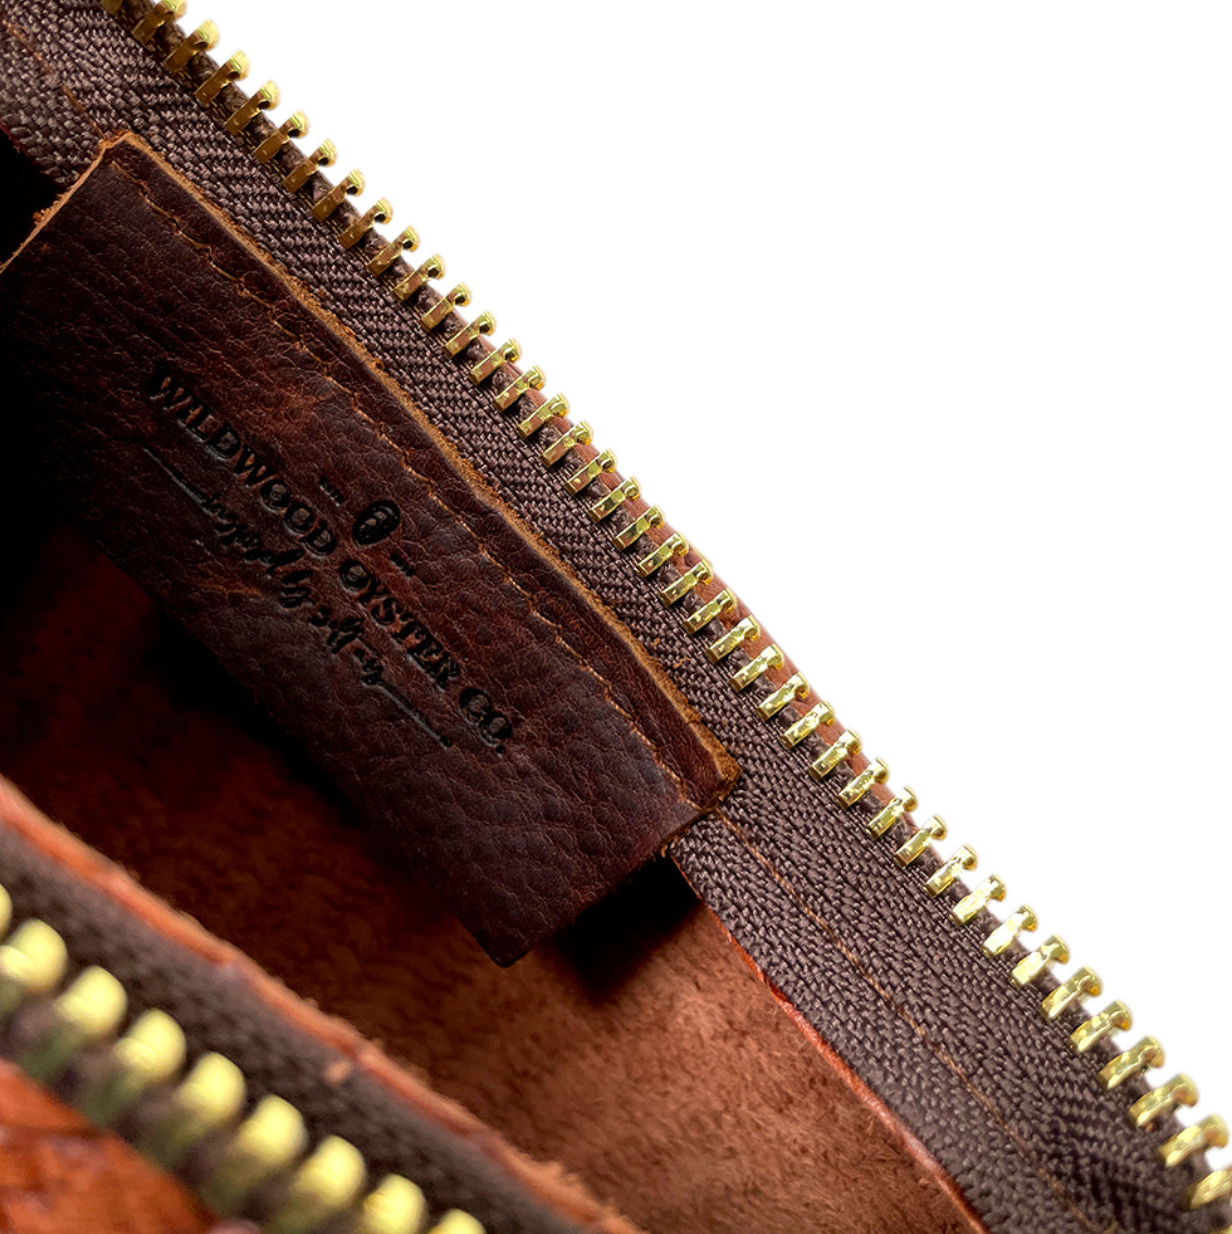 closeup of label inside brown leather bag